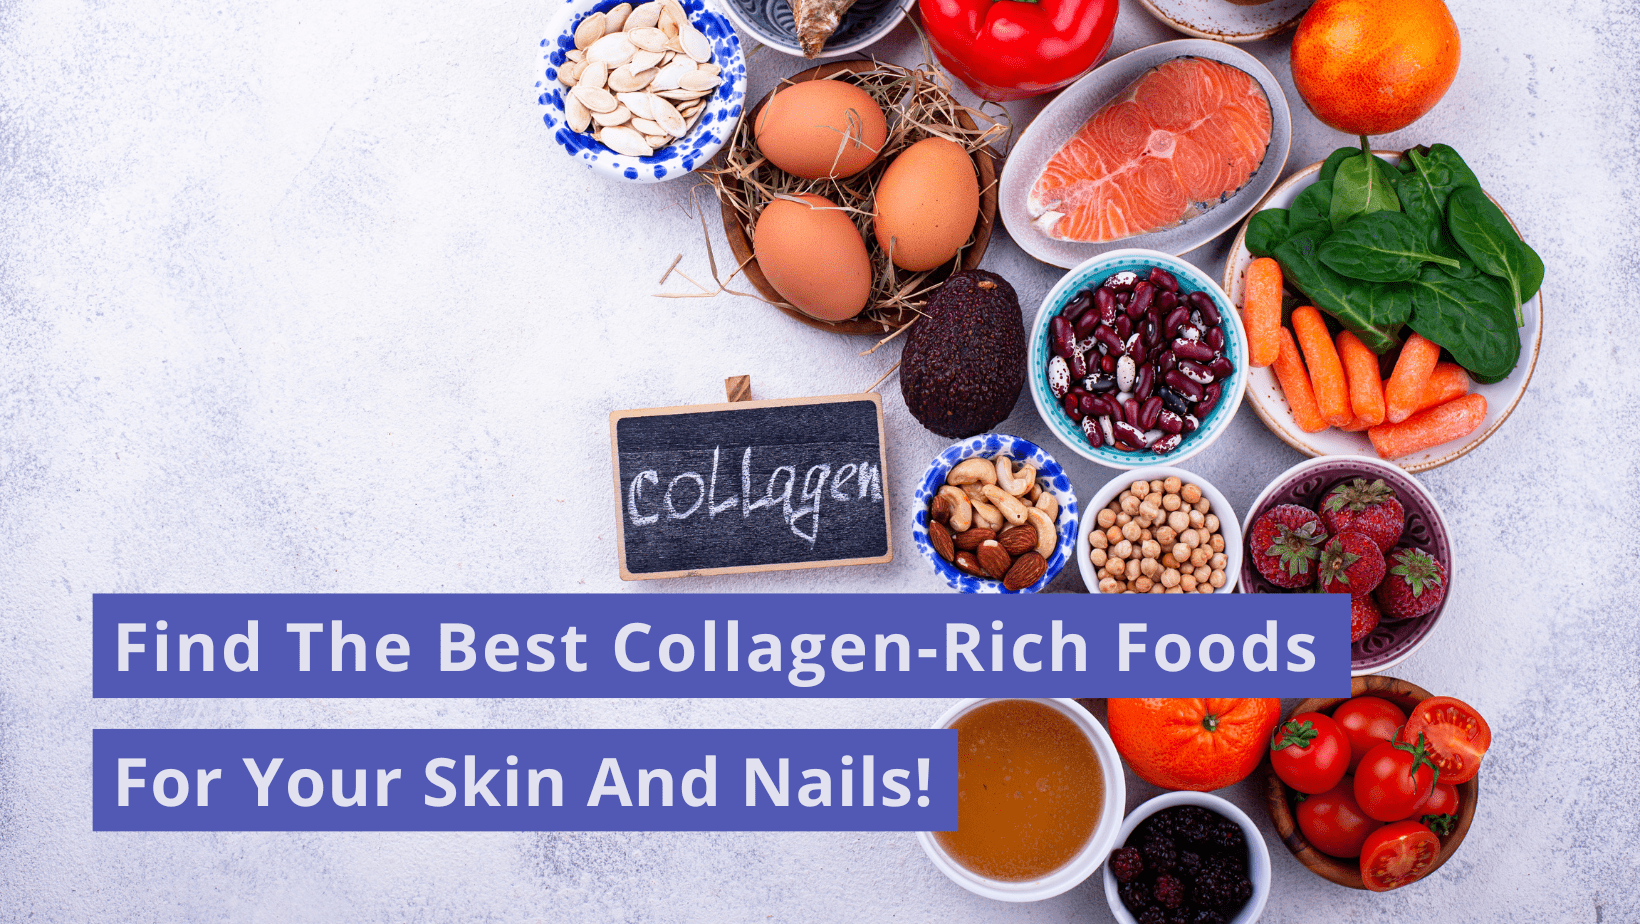 collagen-rich foods for skin and nails